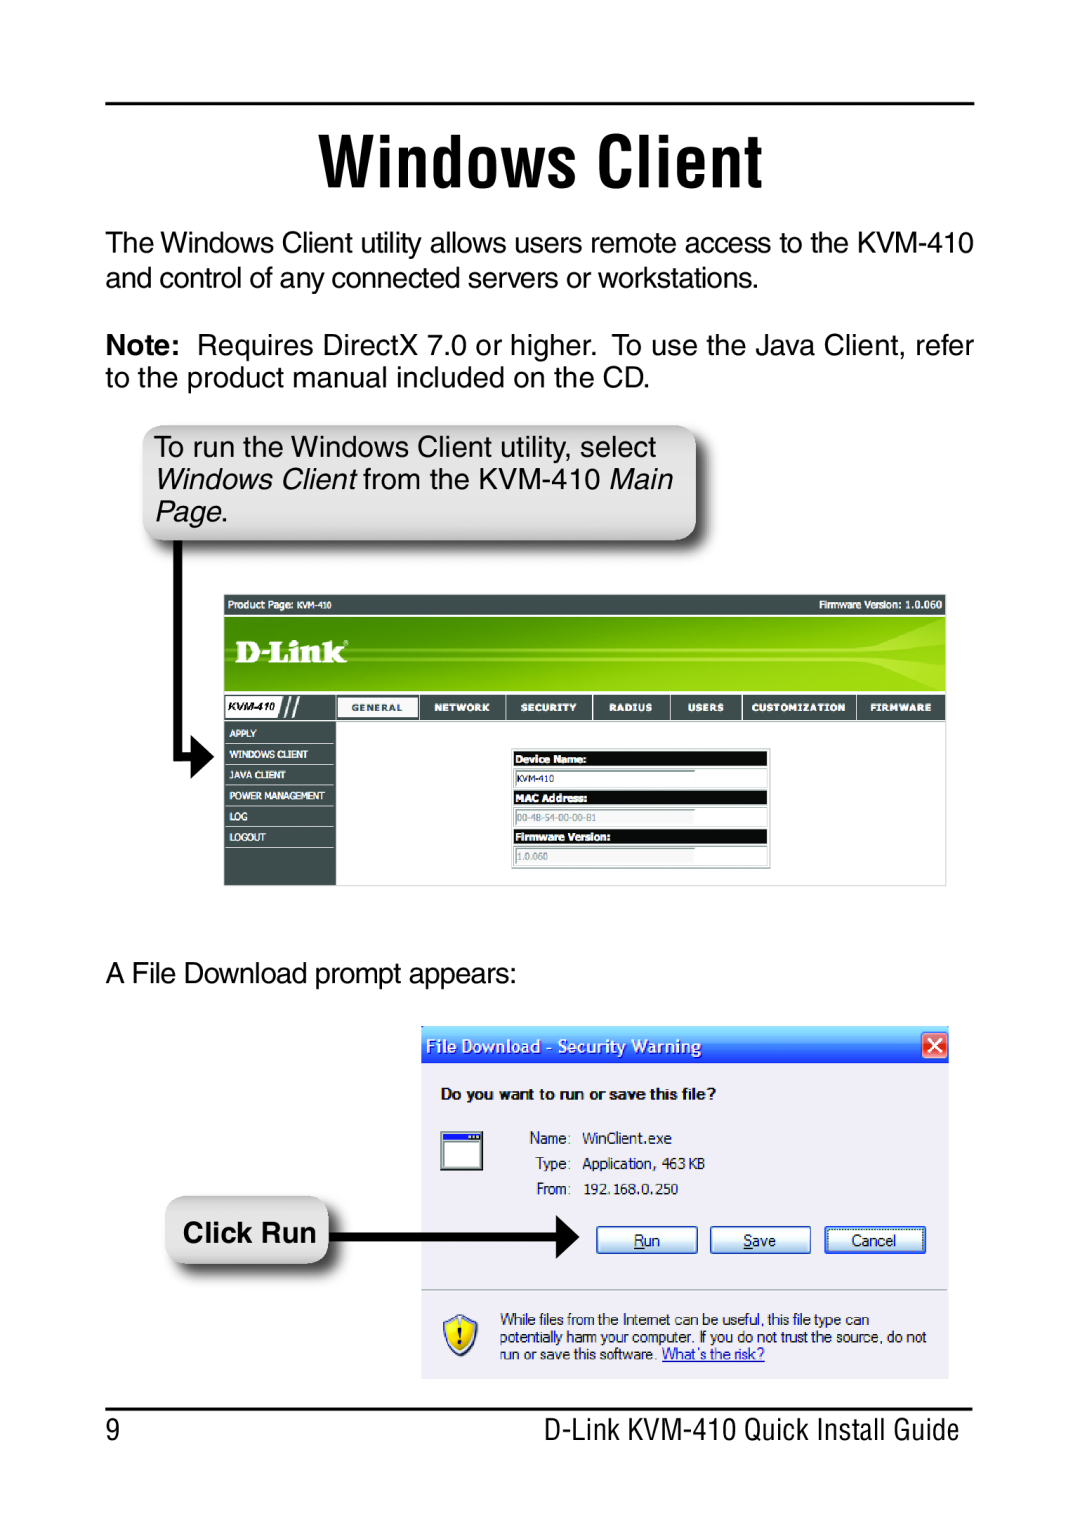 D-Link manual Click Run, Windows Client from the KVM-410 Main Page, D-Link KVM-410 Quick Install Guide 